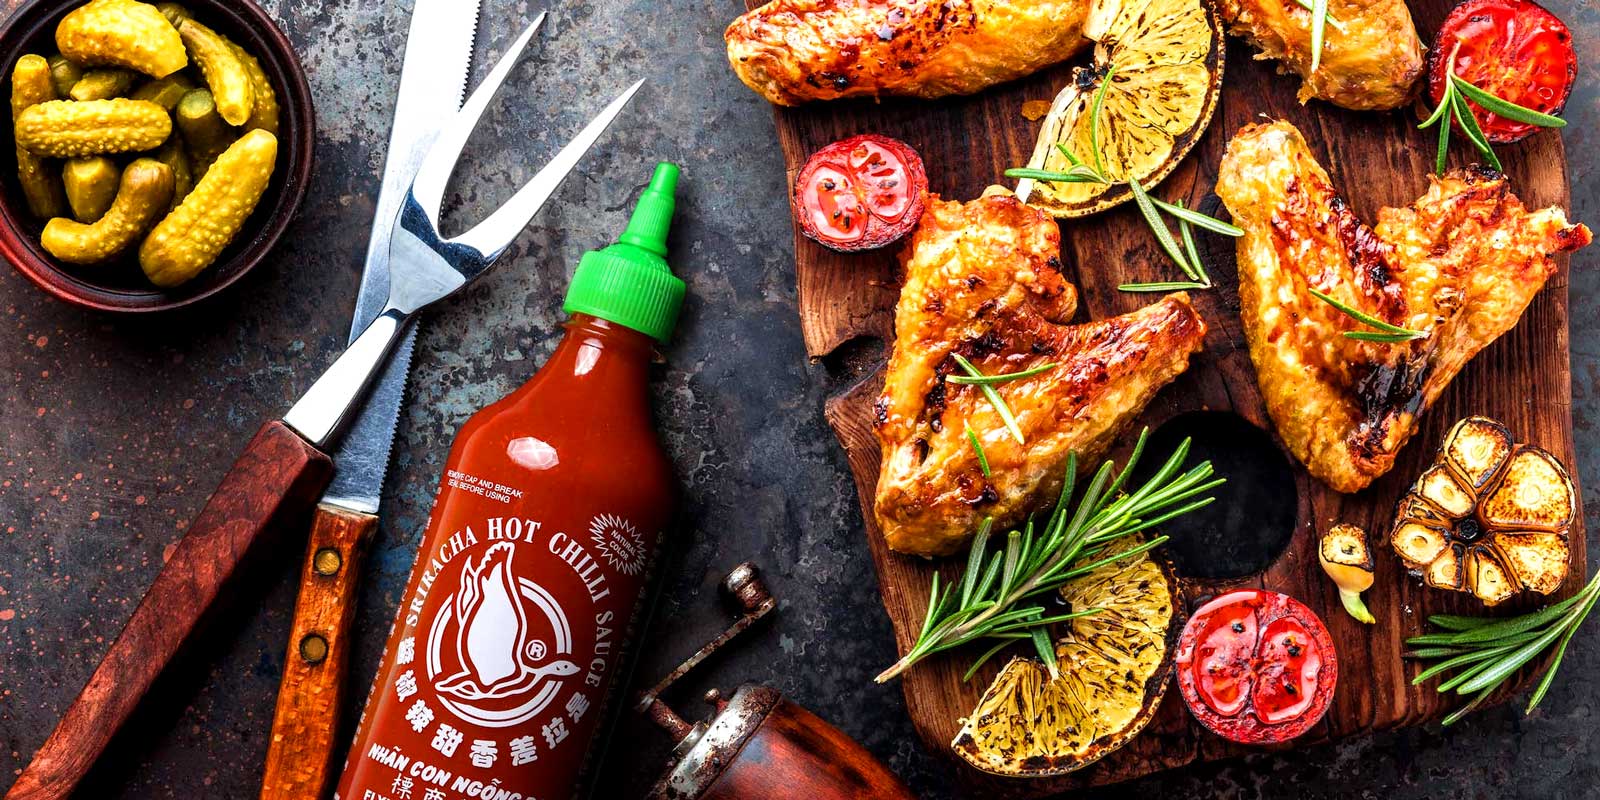 Sriracha sauces from Flying Goose In 1999, our premium Thai sauce brand, Flying Goose, was launched with the aim of raising the standard of hot sauces and providing foodies with the maximum level of flavor to complement all sorts of treats.